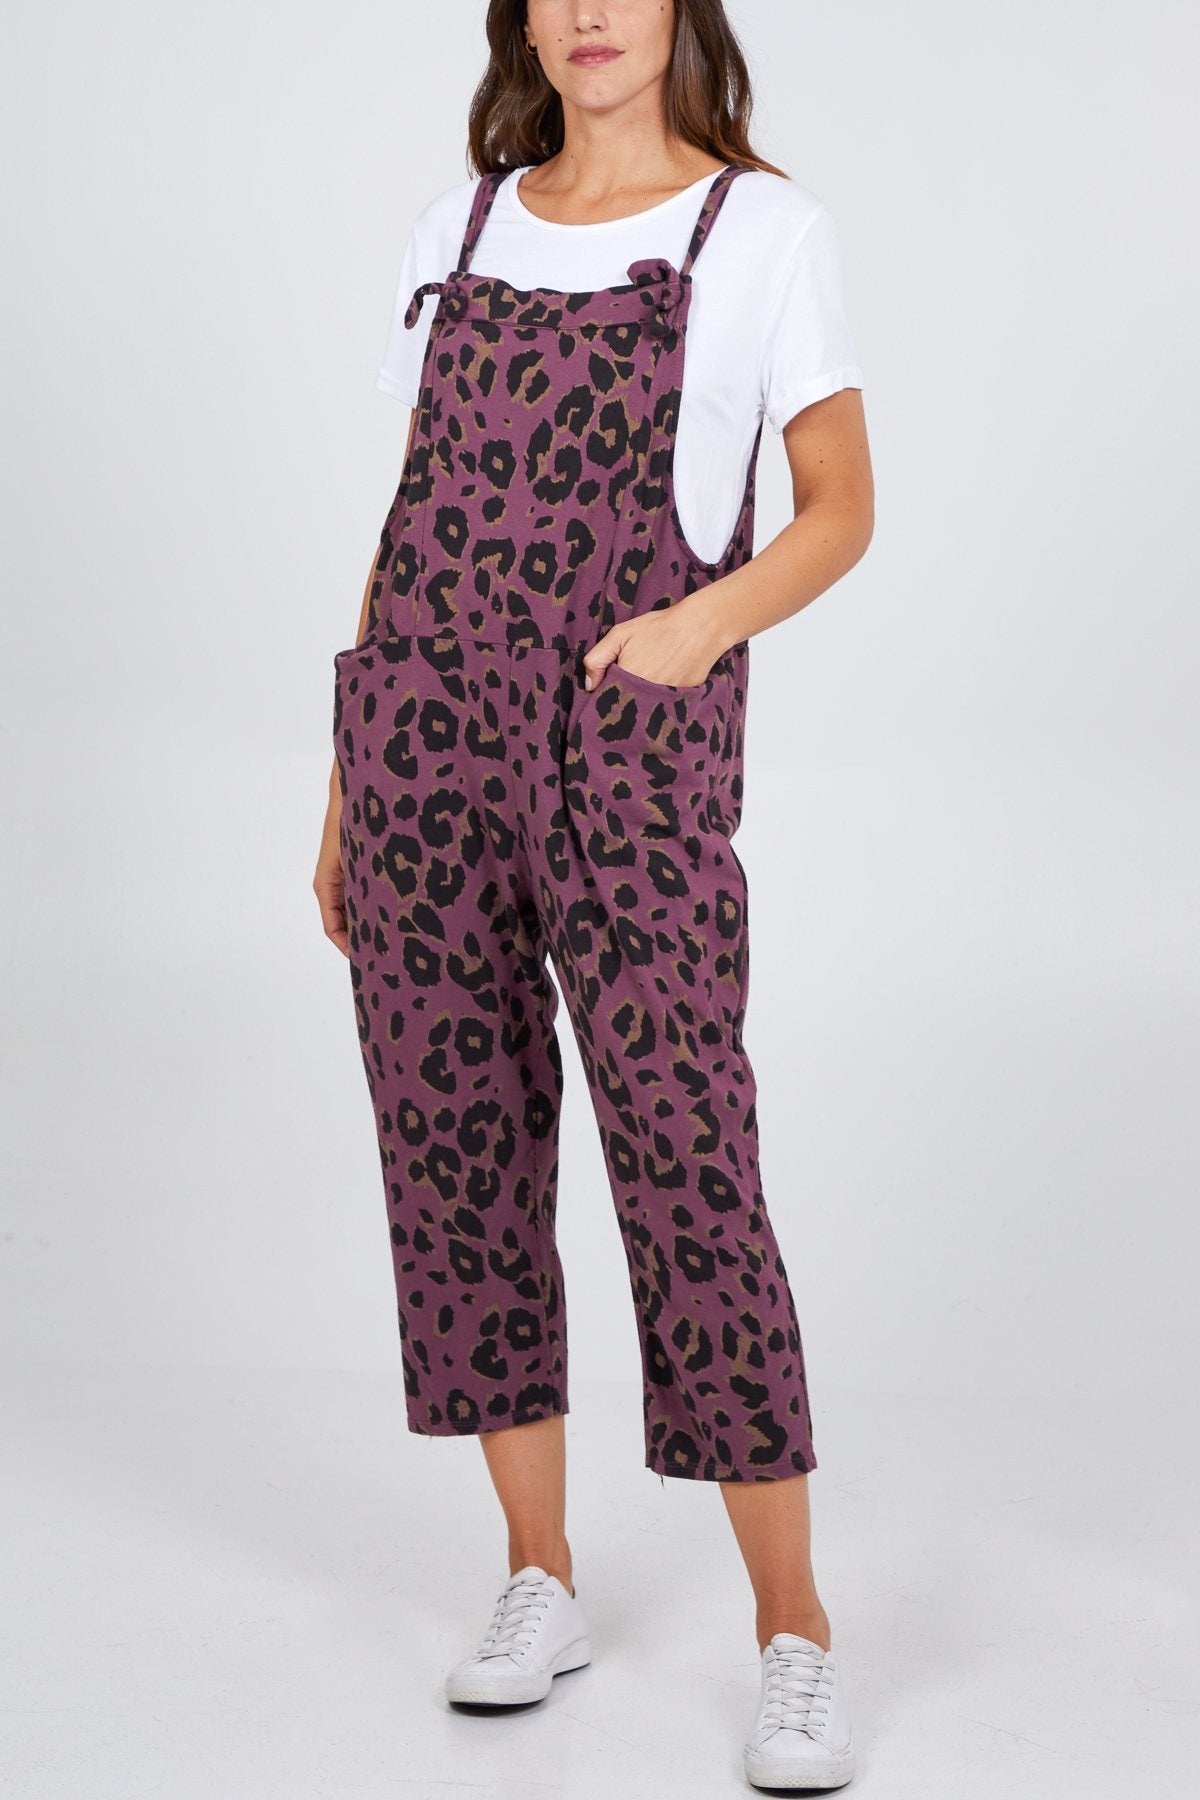 Blackcurrent Leopard Tie Slouch Dungarees